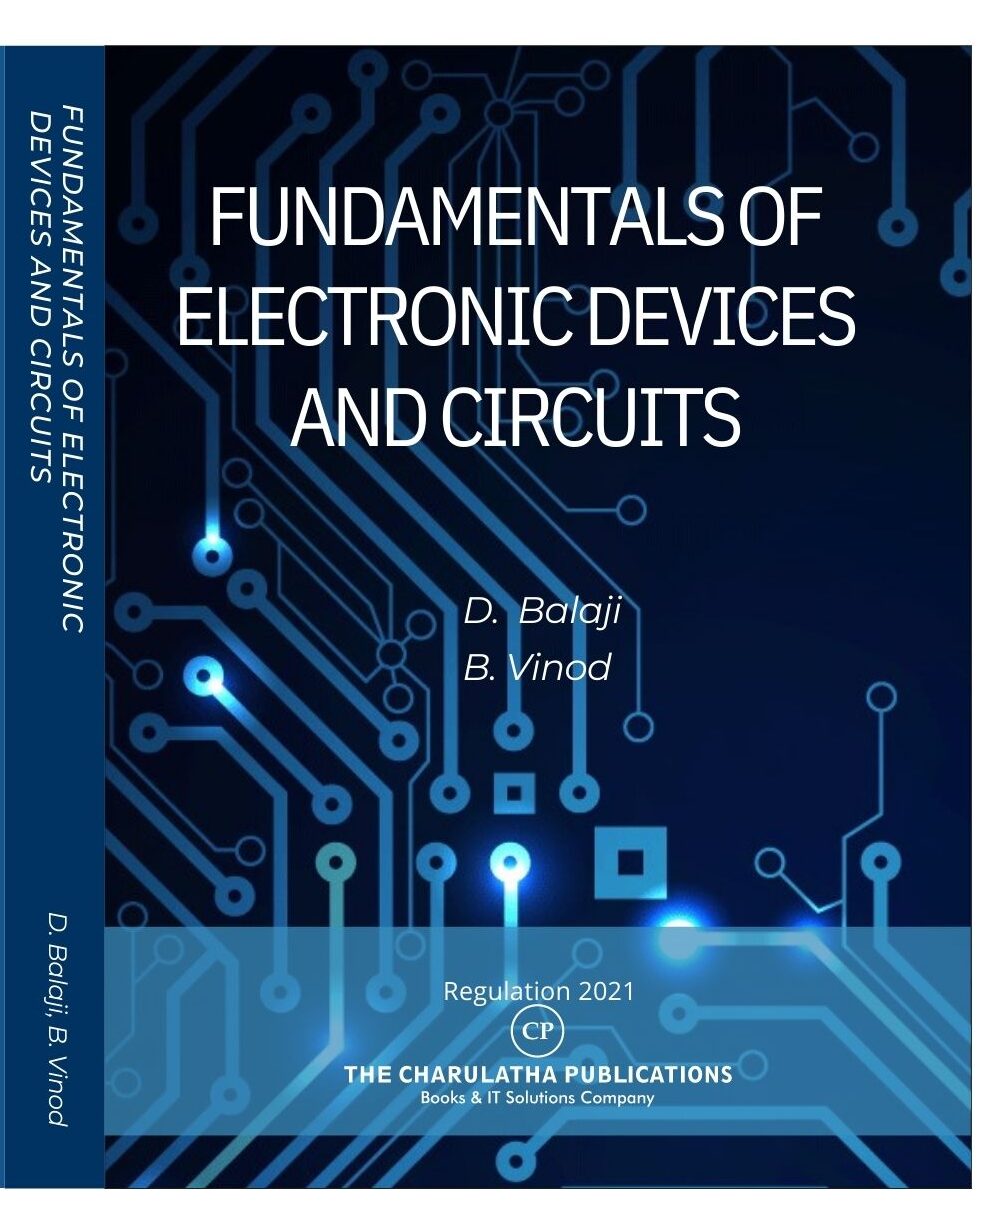 The charulatha publications Fundamentals of electronic devices and circuits